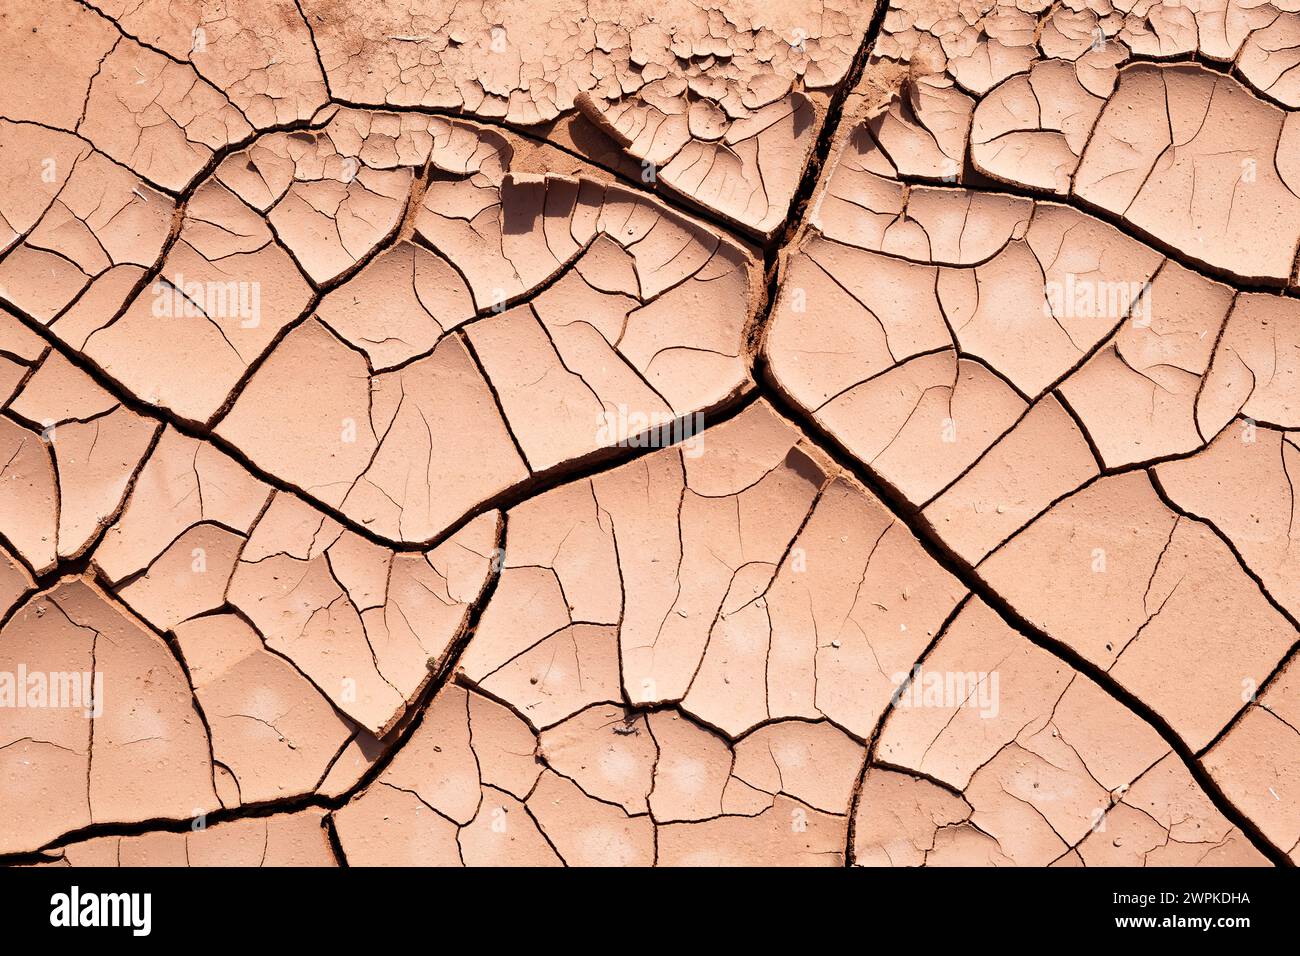 Curious forms of cracked earth Stock Photo